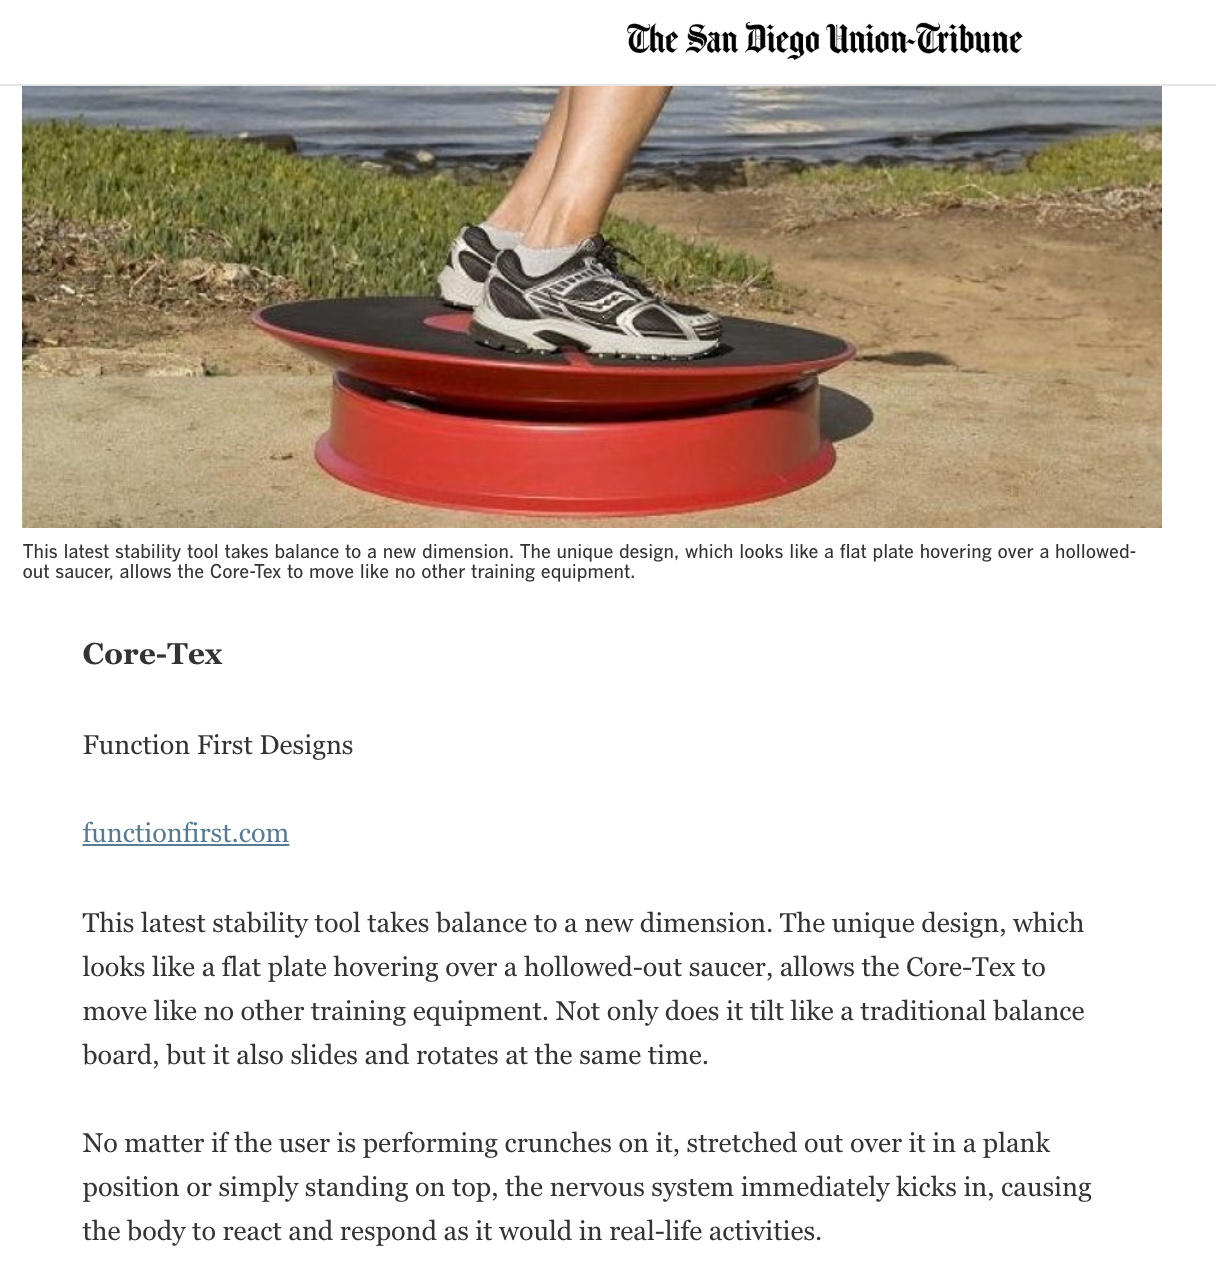 SAN DIEGO UNION TRIBUNE APRIL 6, 2010: Equipment adds muscle to cross-training workouts